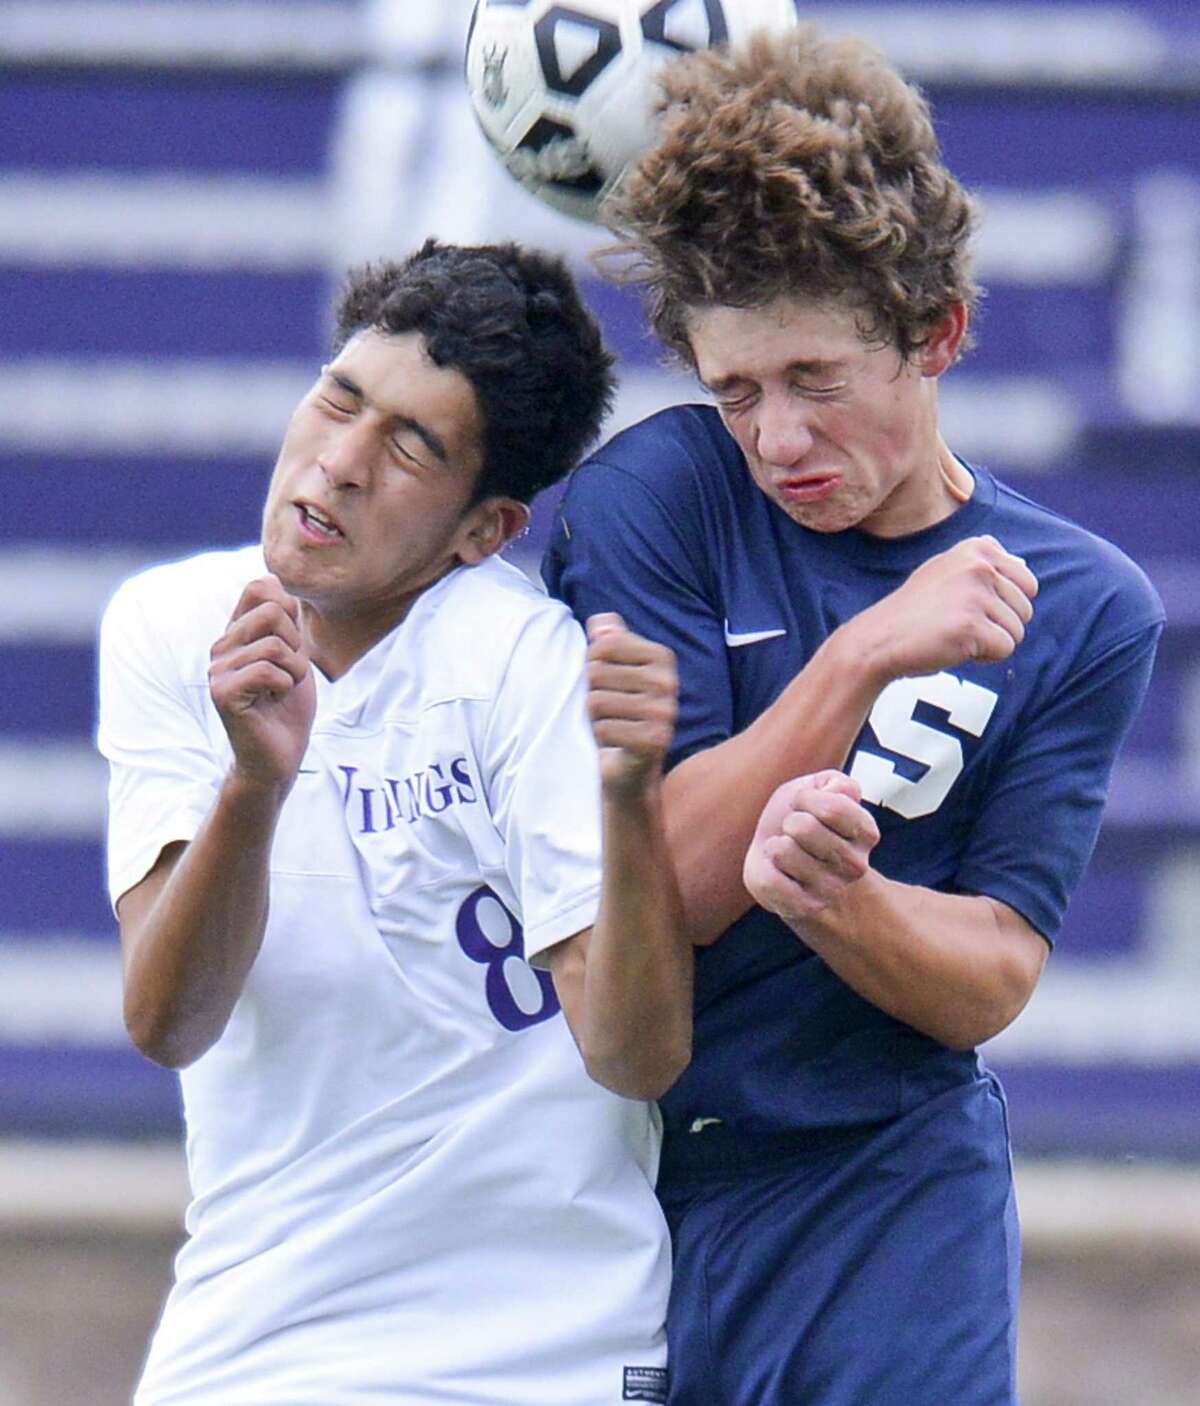 Westhill’s David Sagastume and Staples’ Pato Perez Elorza go head to head in an Oct. 5 game.